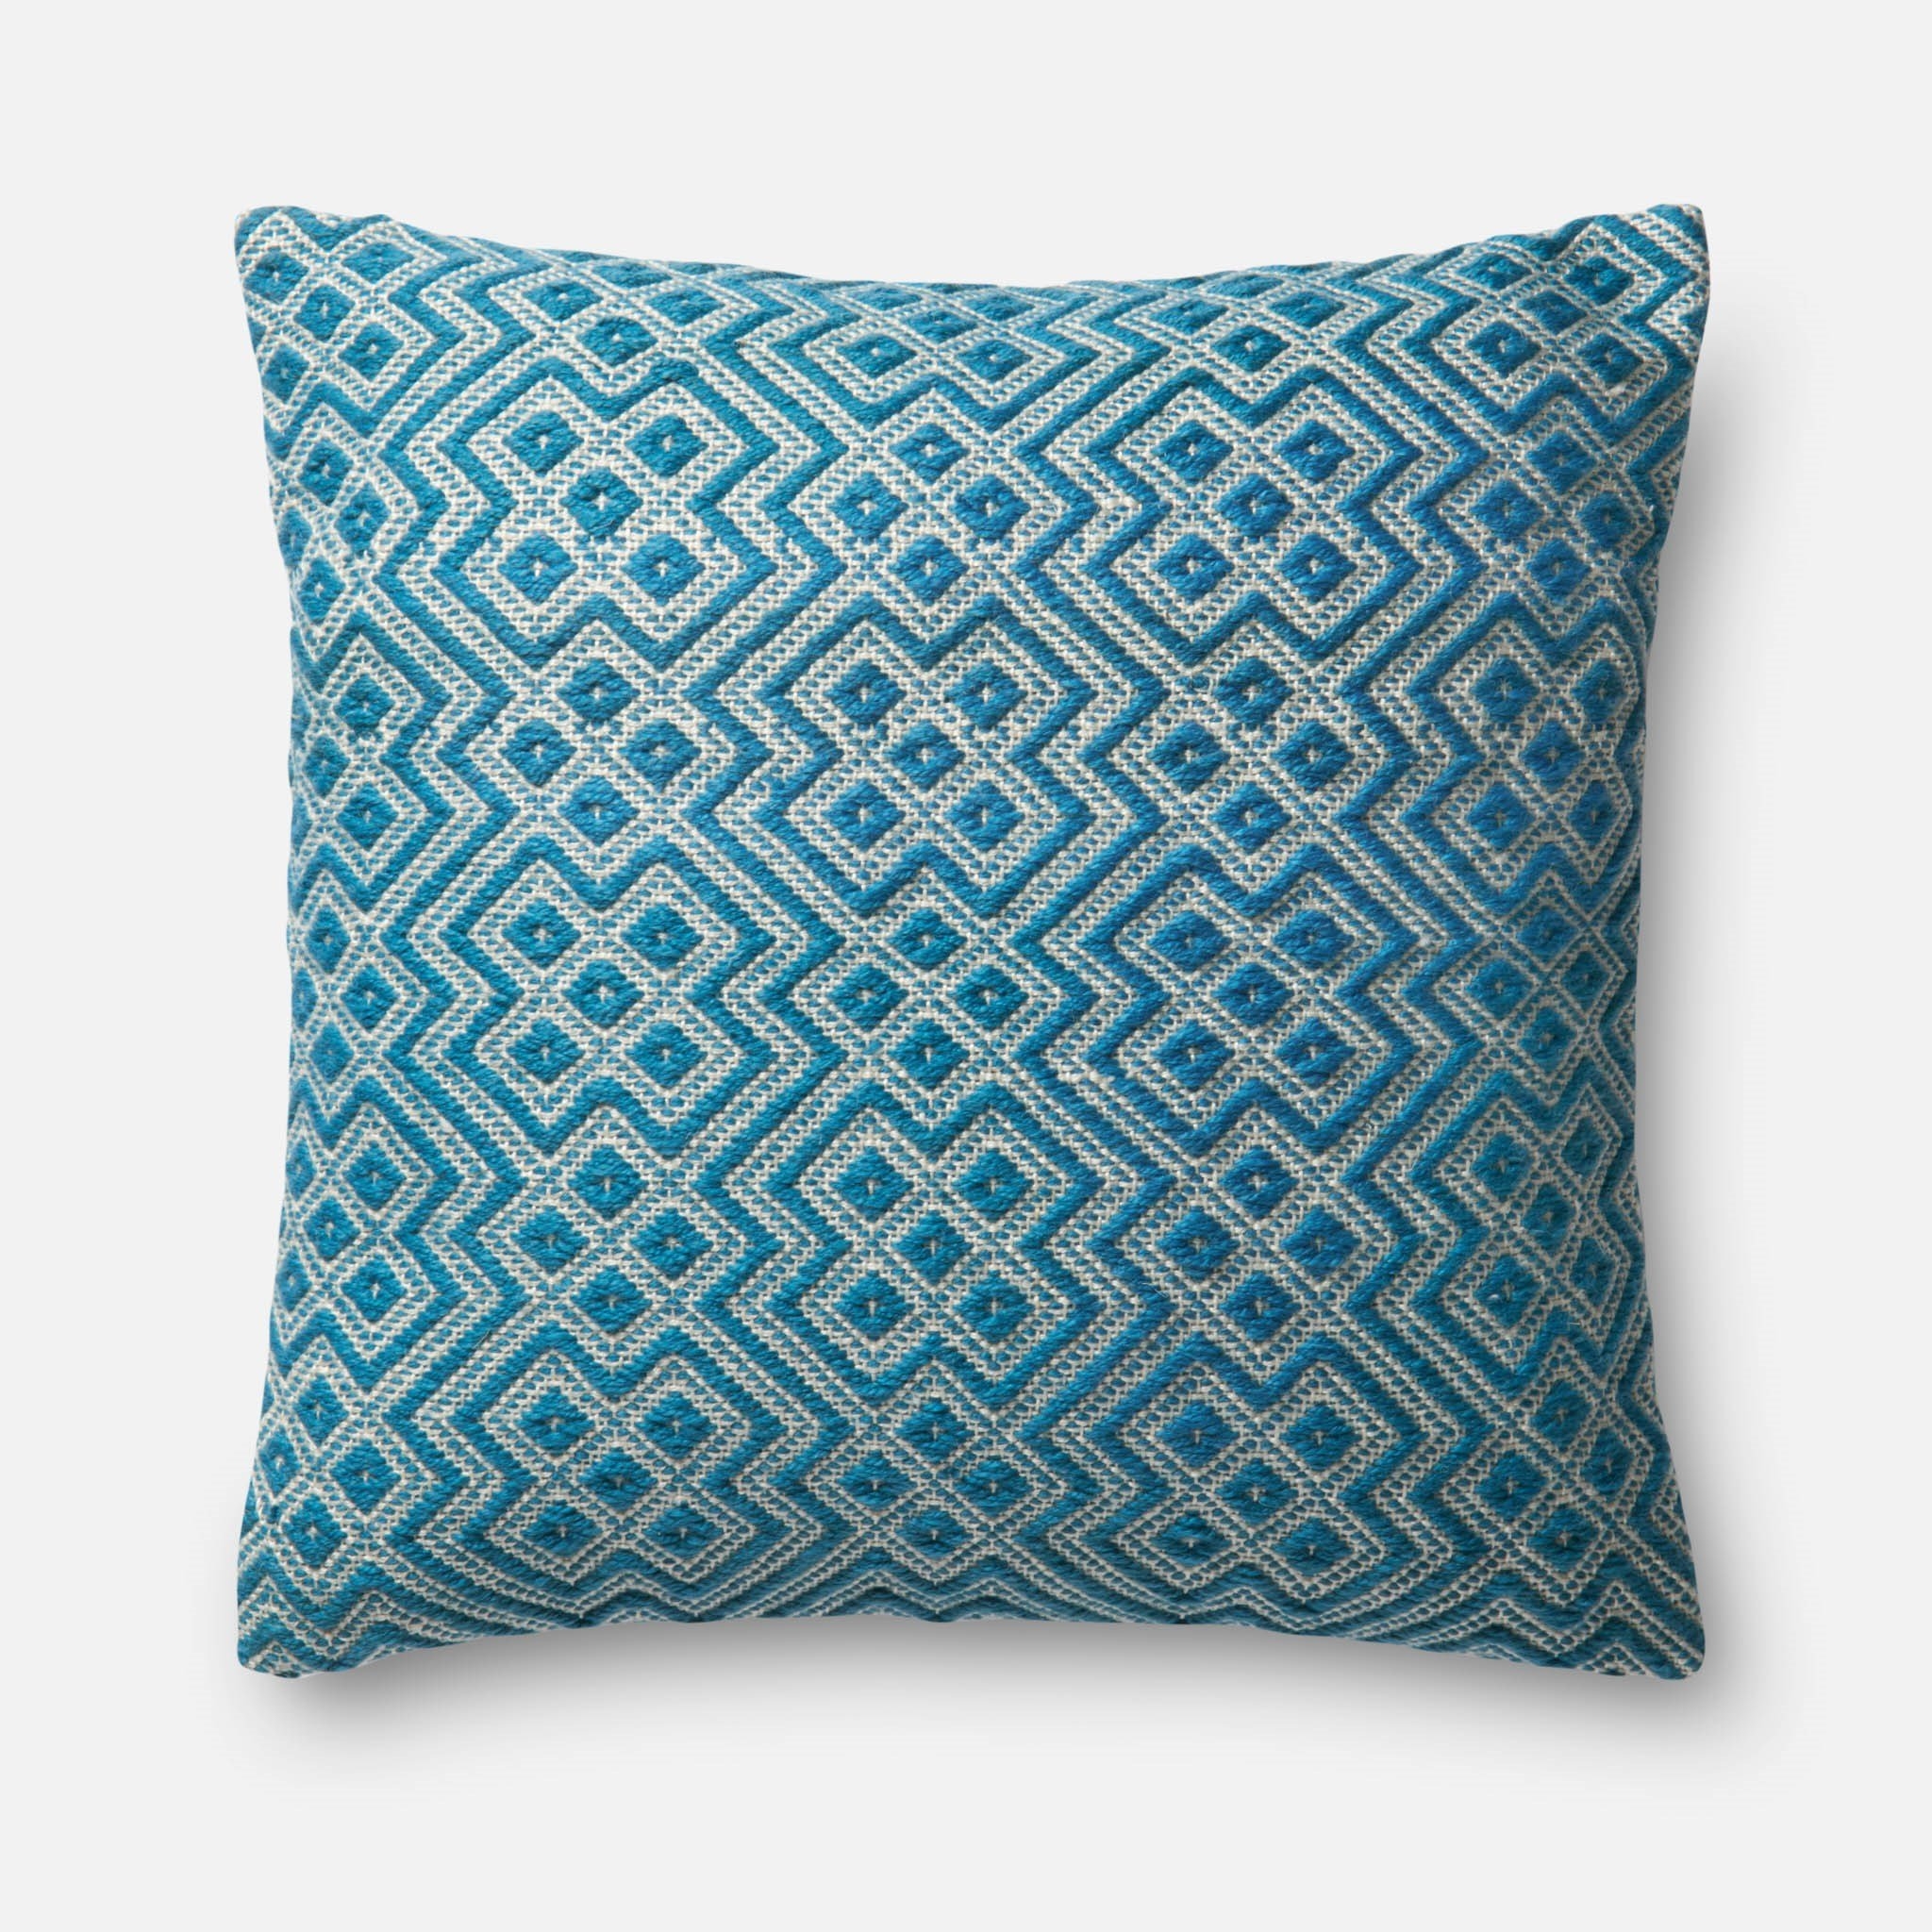 PILLOWS - TEAL / WHITE - 22" X 22" Cover w/Down - Image 0